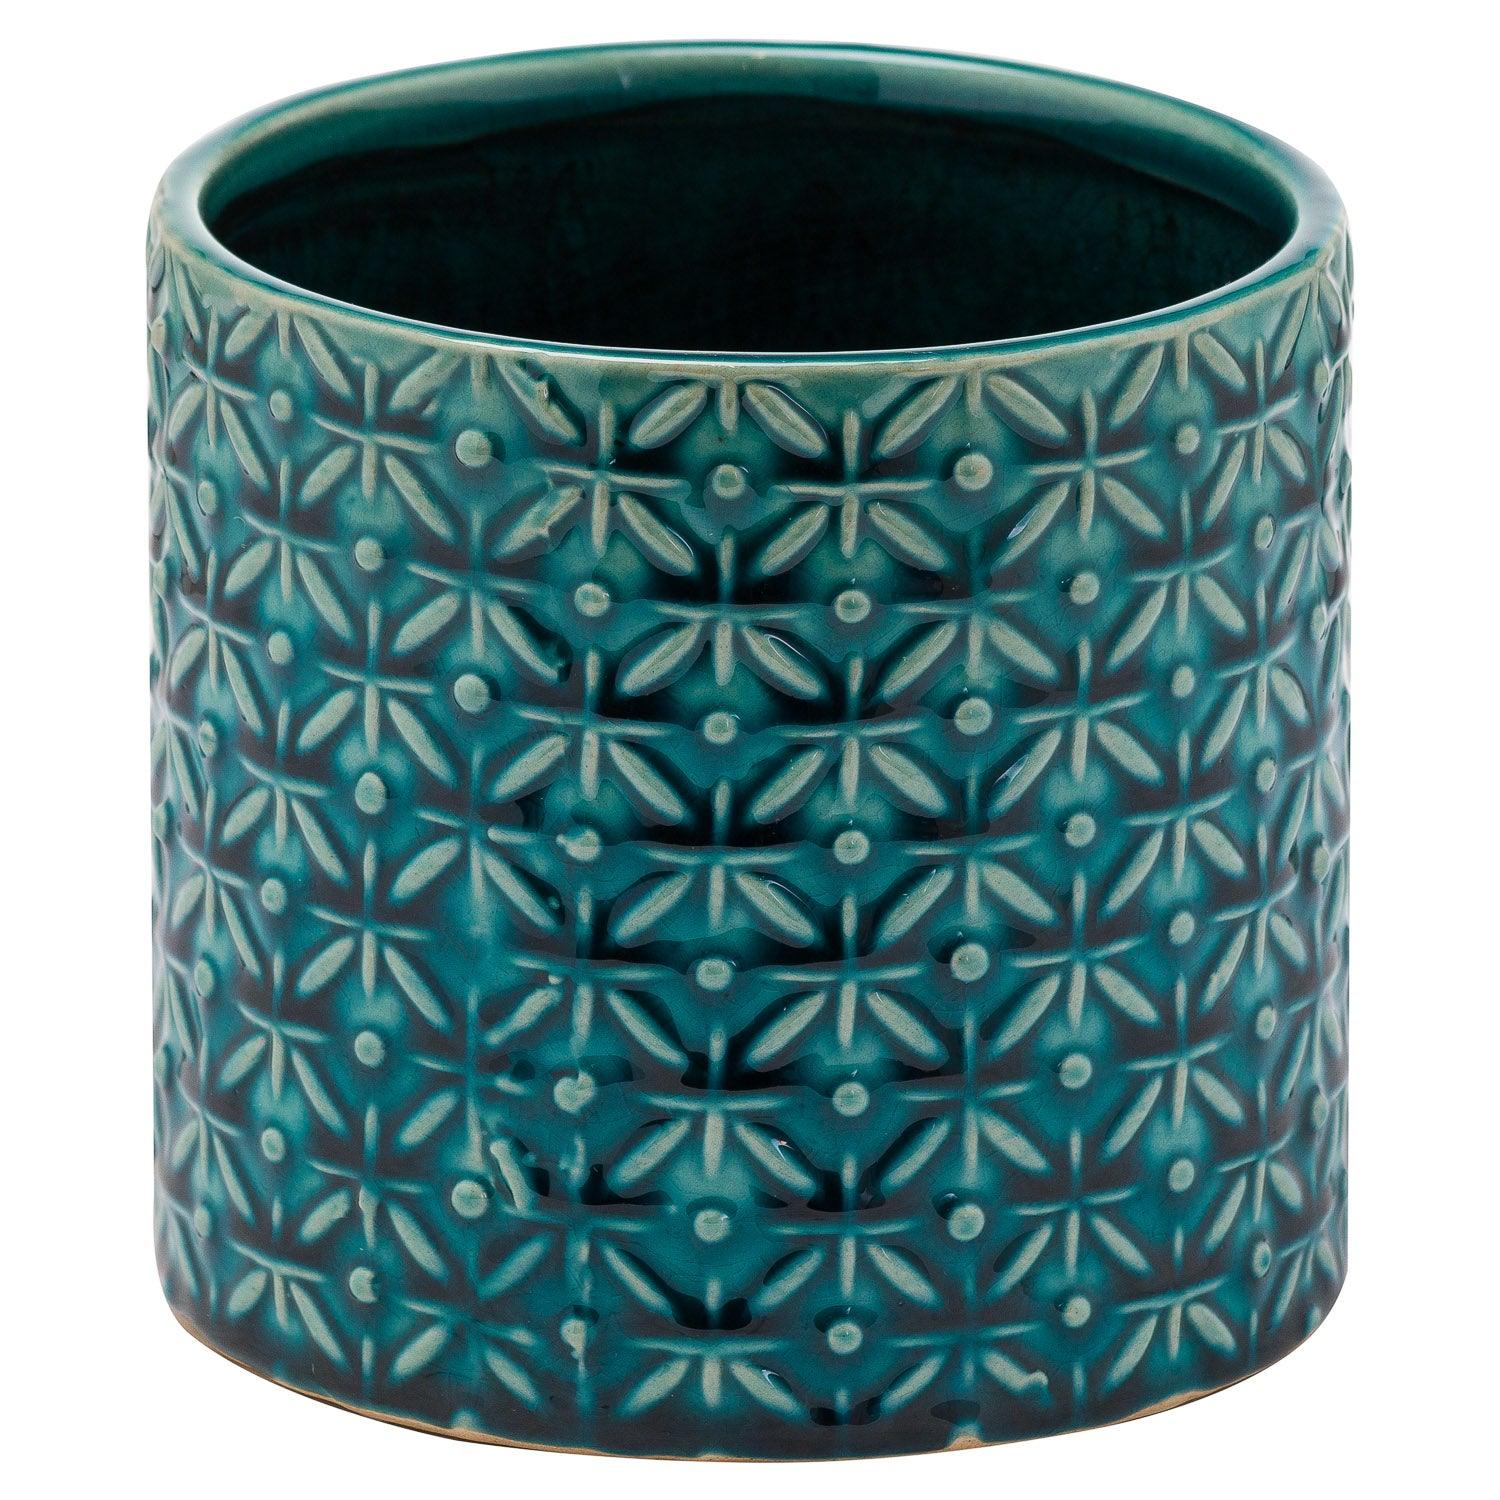 Seville Collection Thea Planter - Charming Spaces